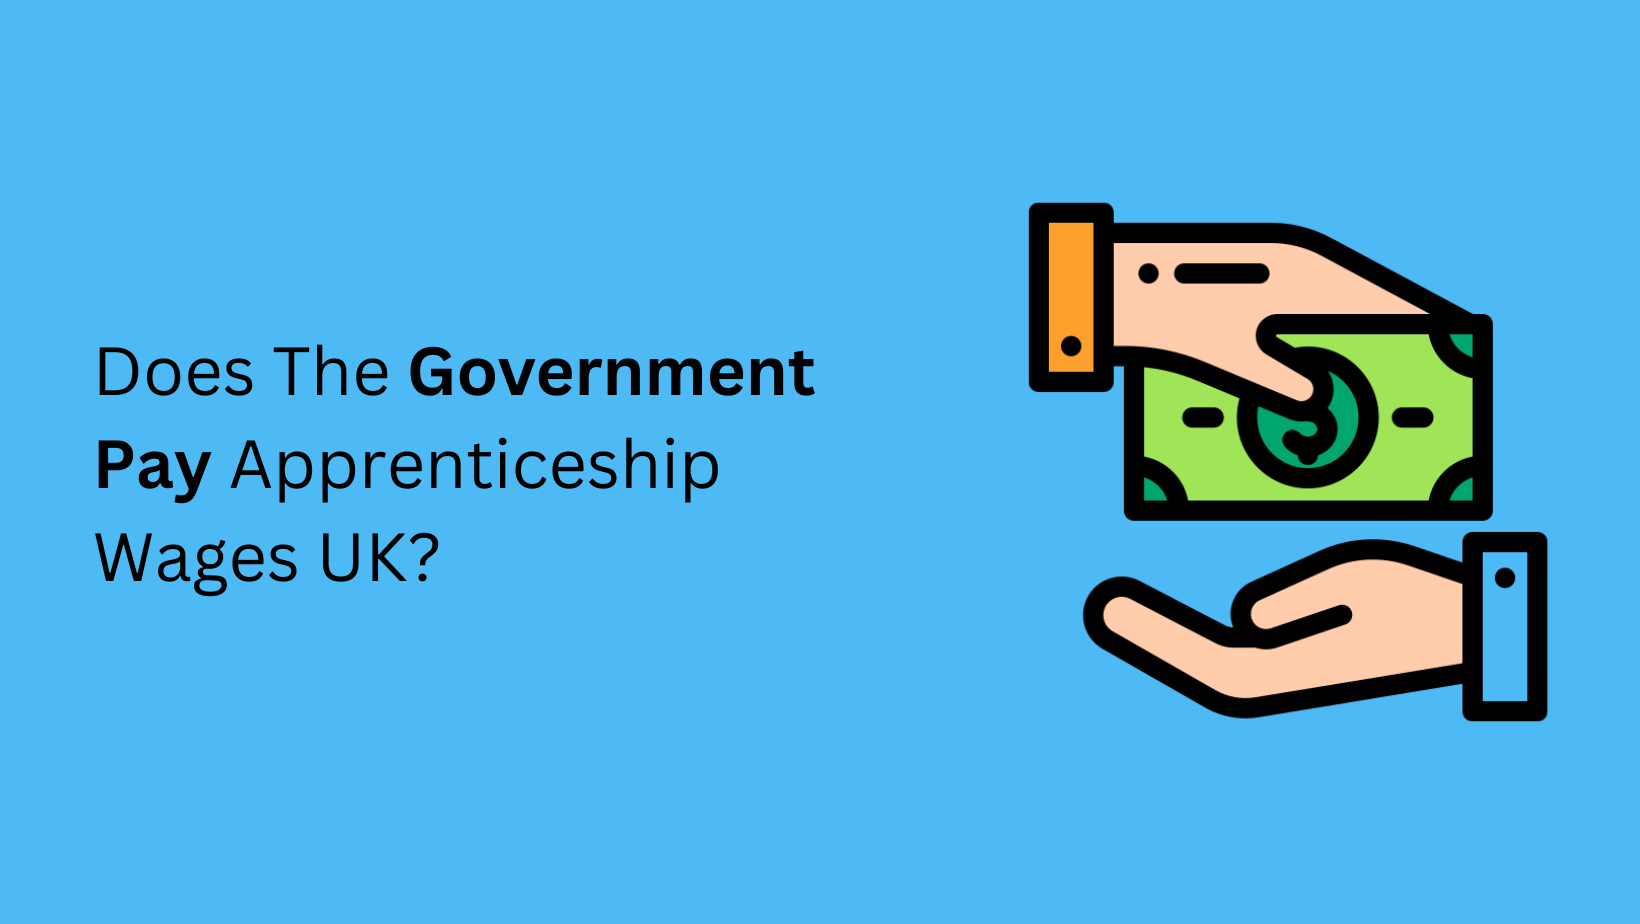 Does the Government Pay Apprenticeship Wages UK